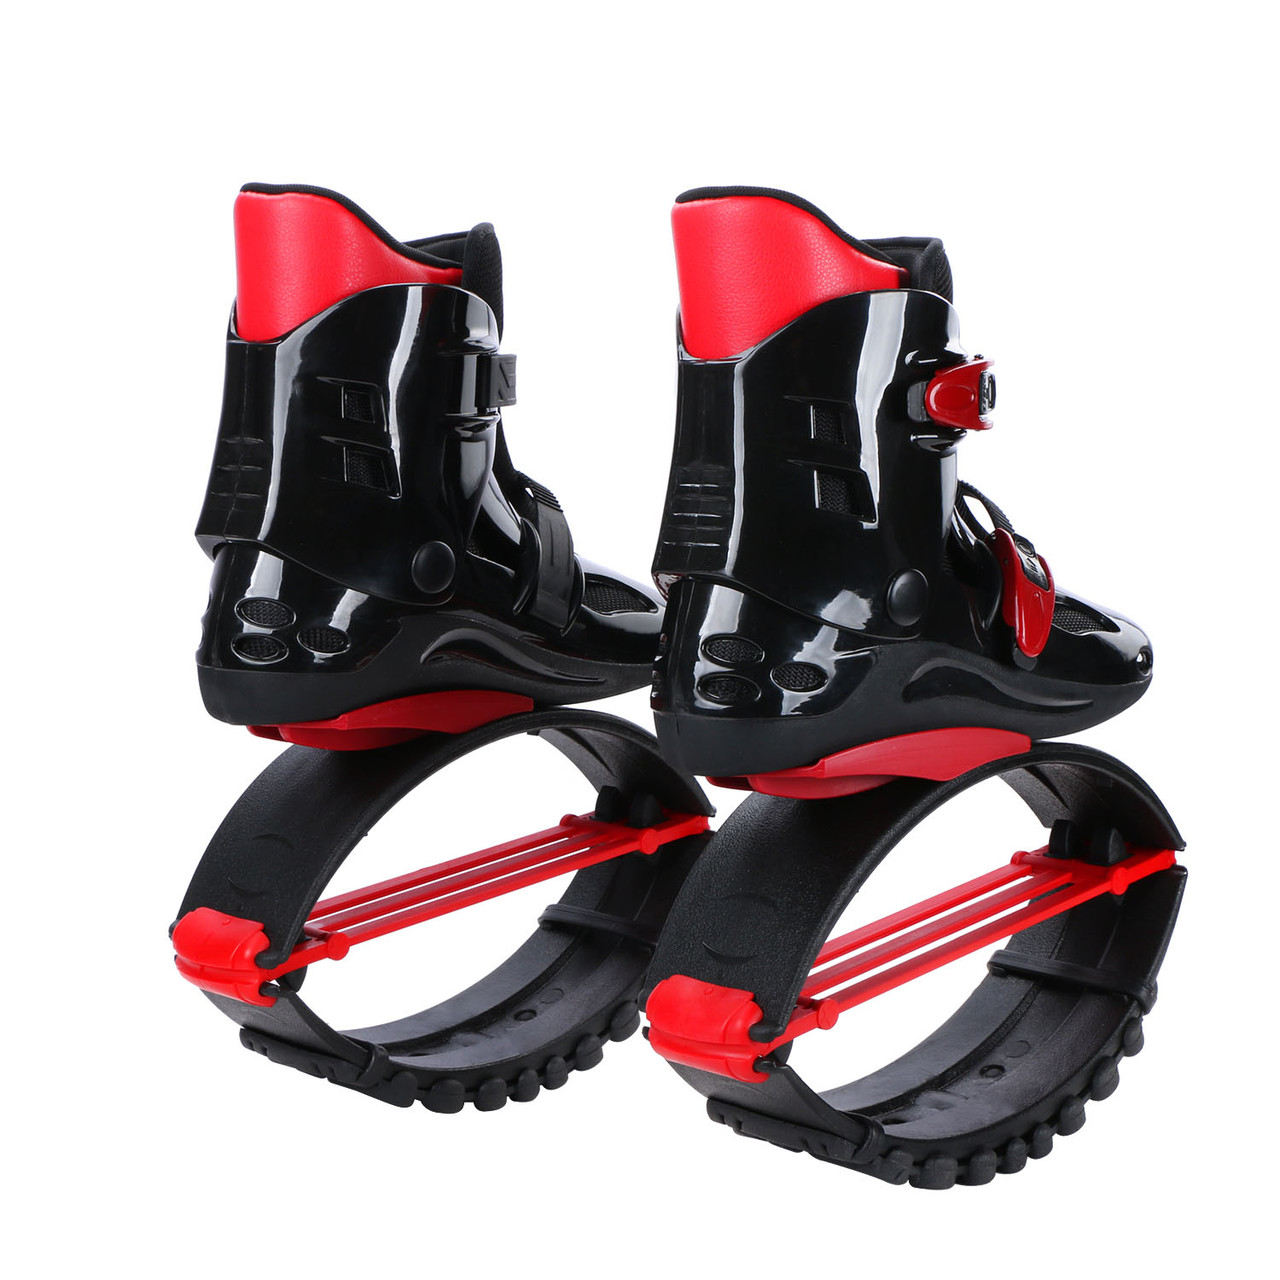 JOYFAY Black and Red Jumping Shoes- Unisex Fitness Jump Shoes